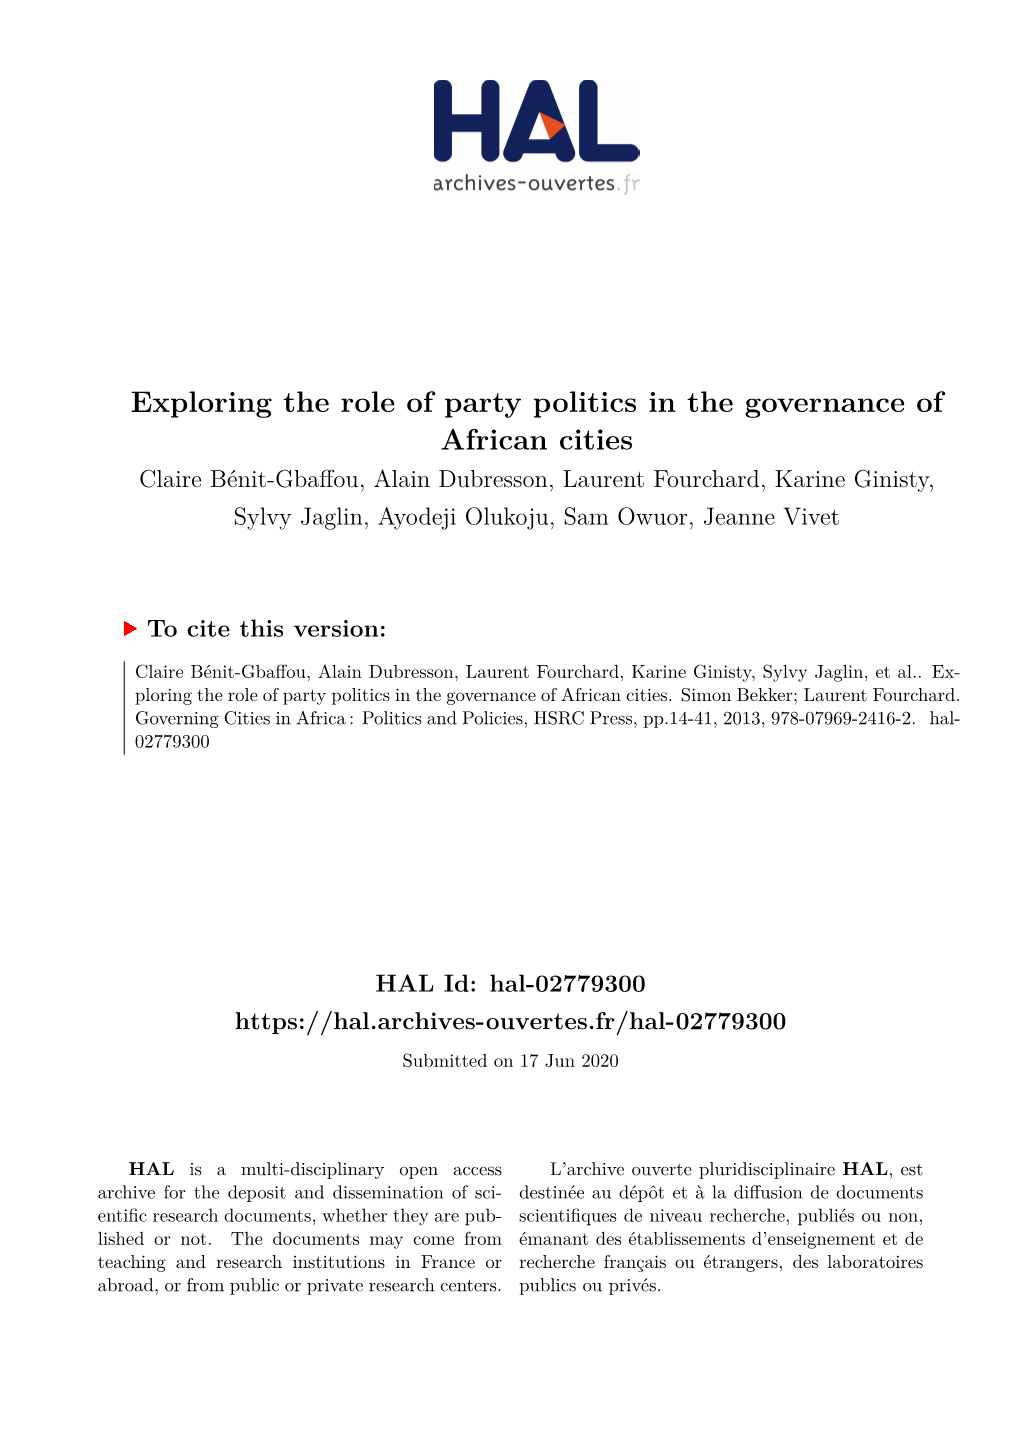 Exploring the Role of Party Politics in the Governance of African Cities